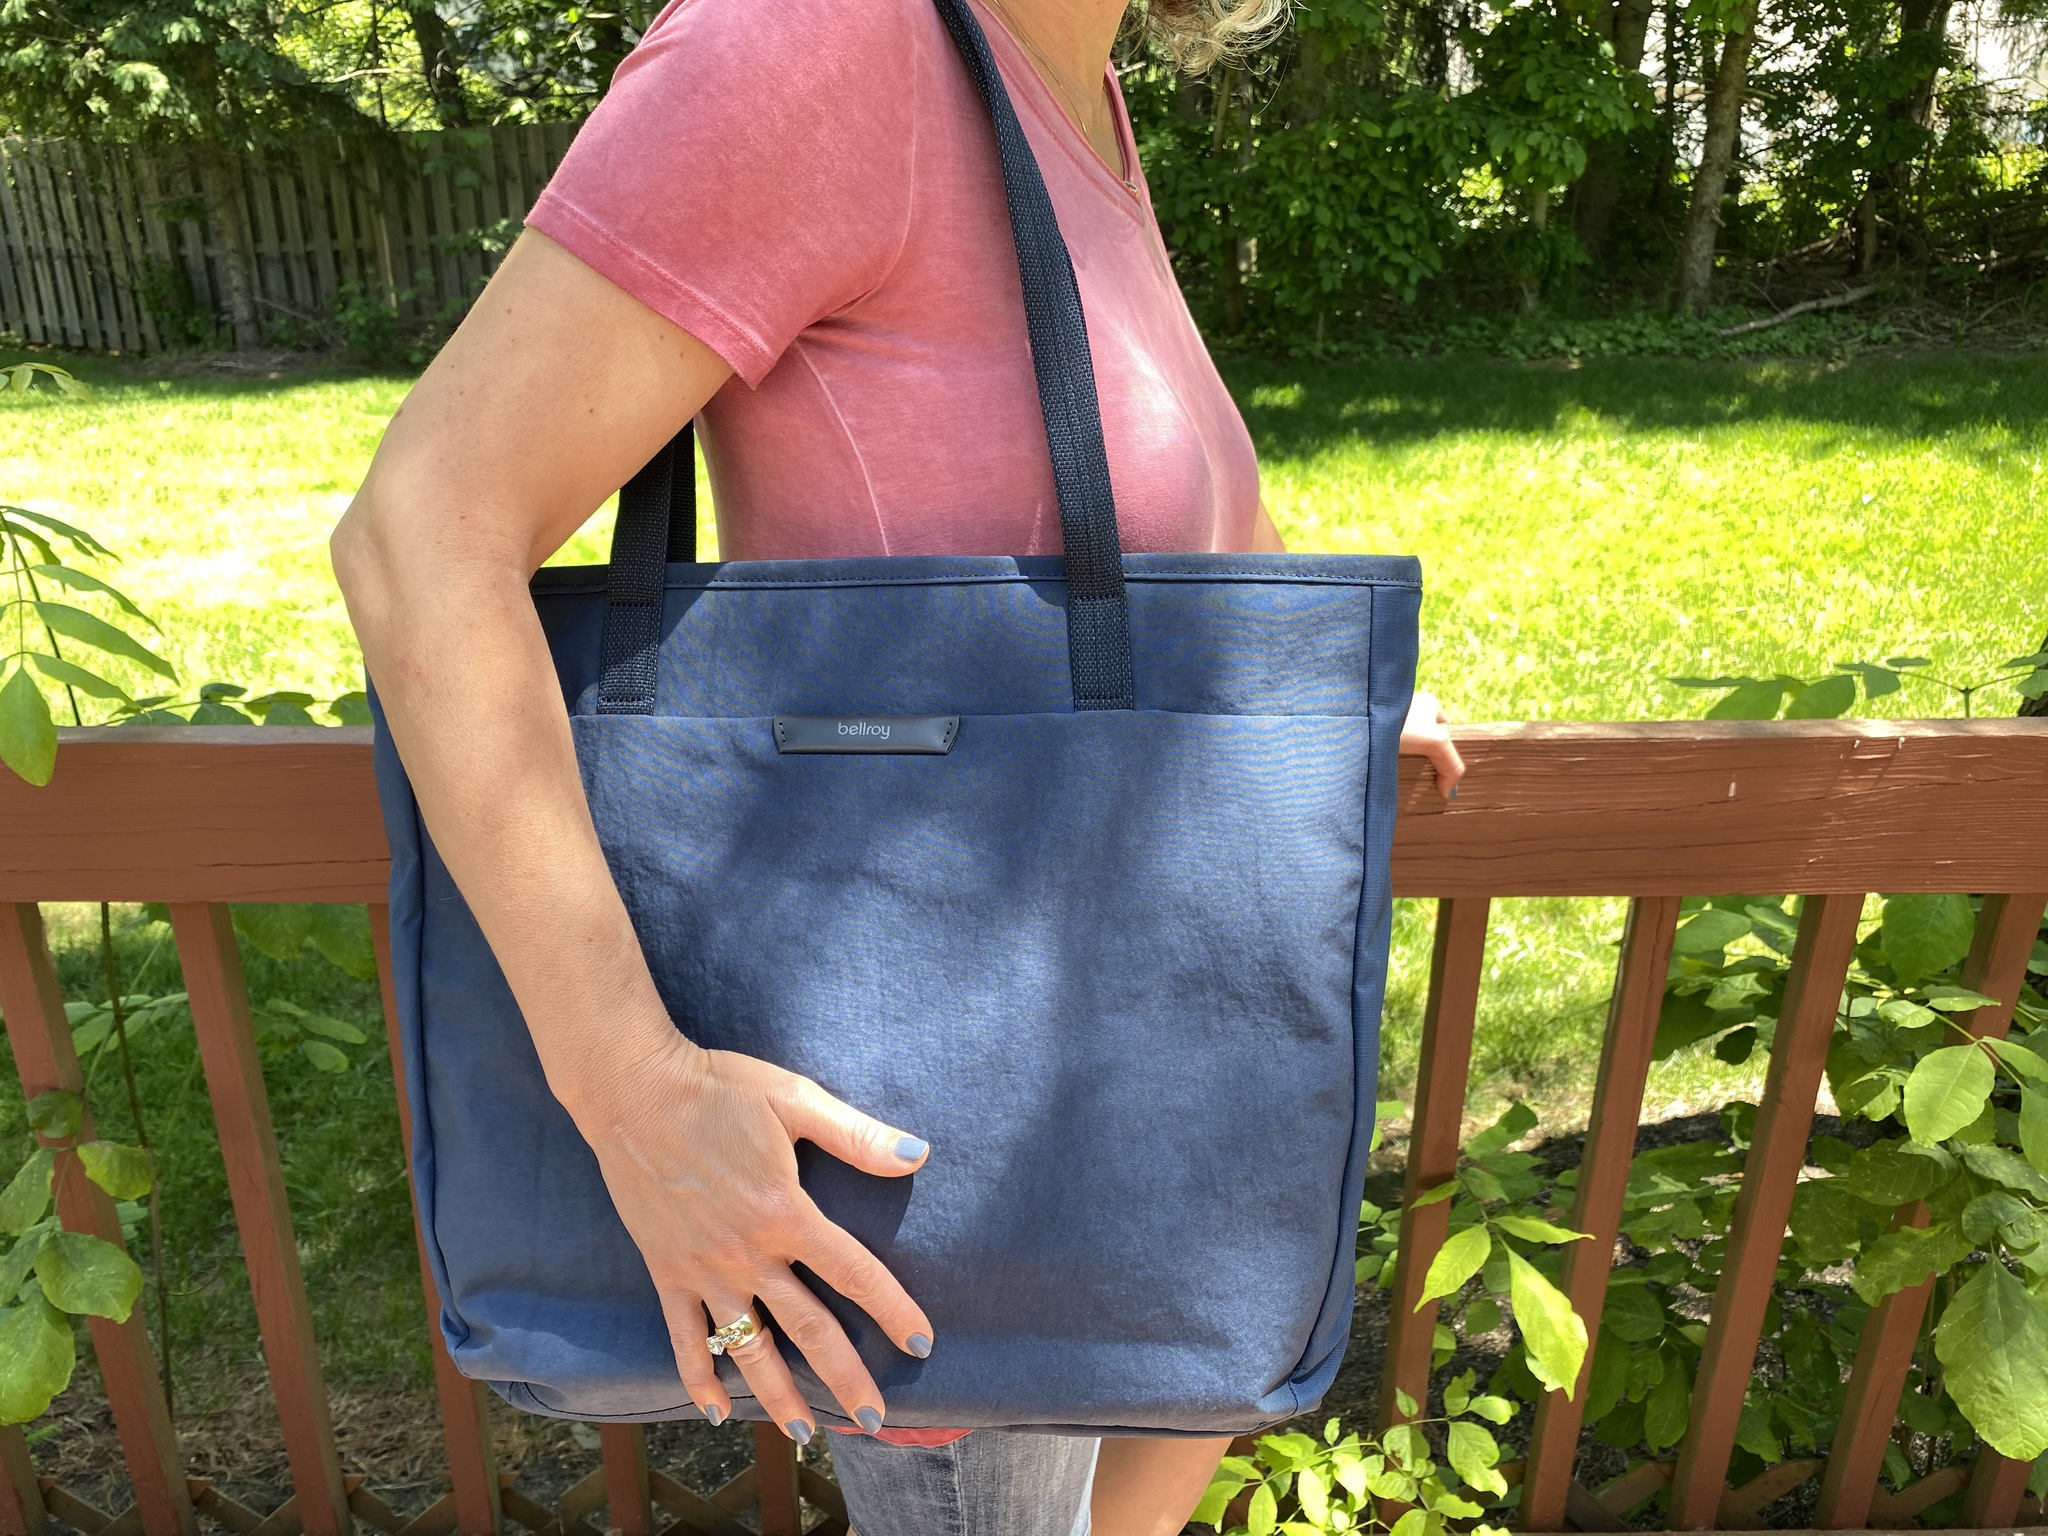 Bellroy Tokyo Tote review: Carry your 13-inch laptop and more in